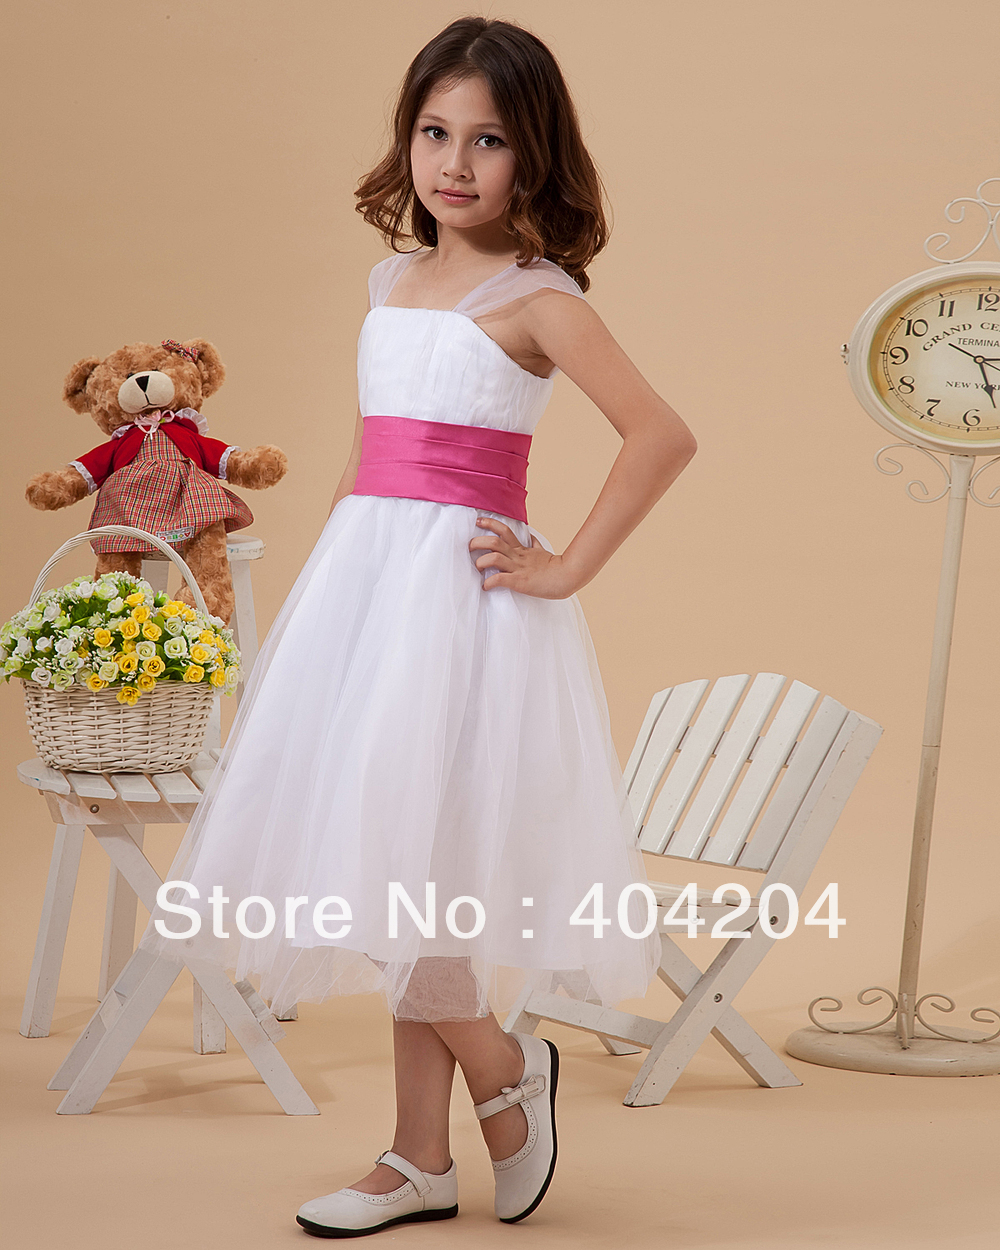 2013 New Style Free Shipping Organza Sash Layered Shoulder Straps Knee Length Flower Girl Dresses Custom All  Size(PEU3O0NX)